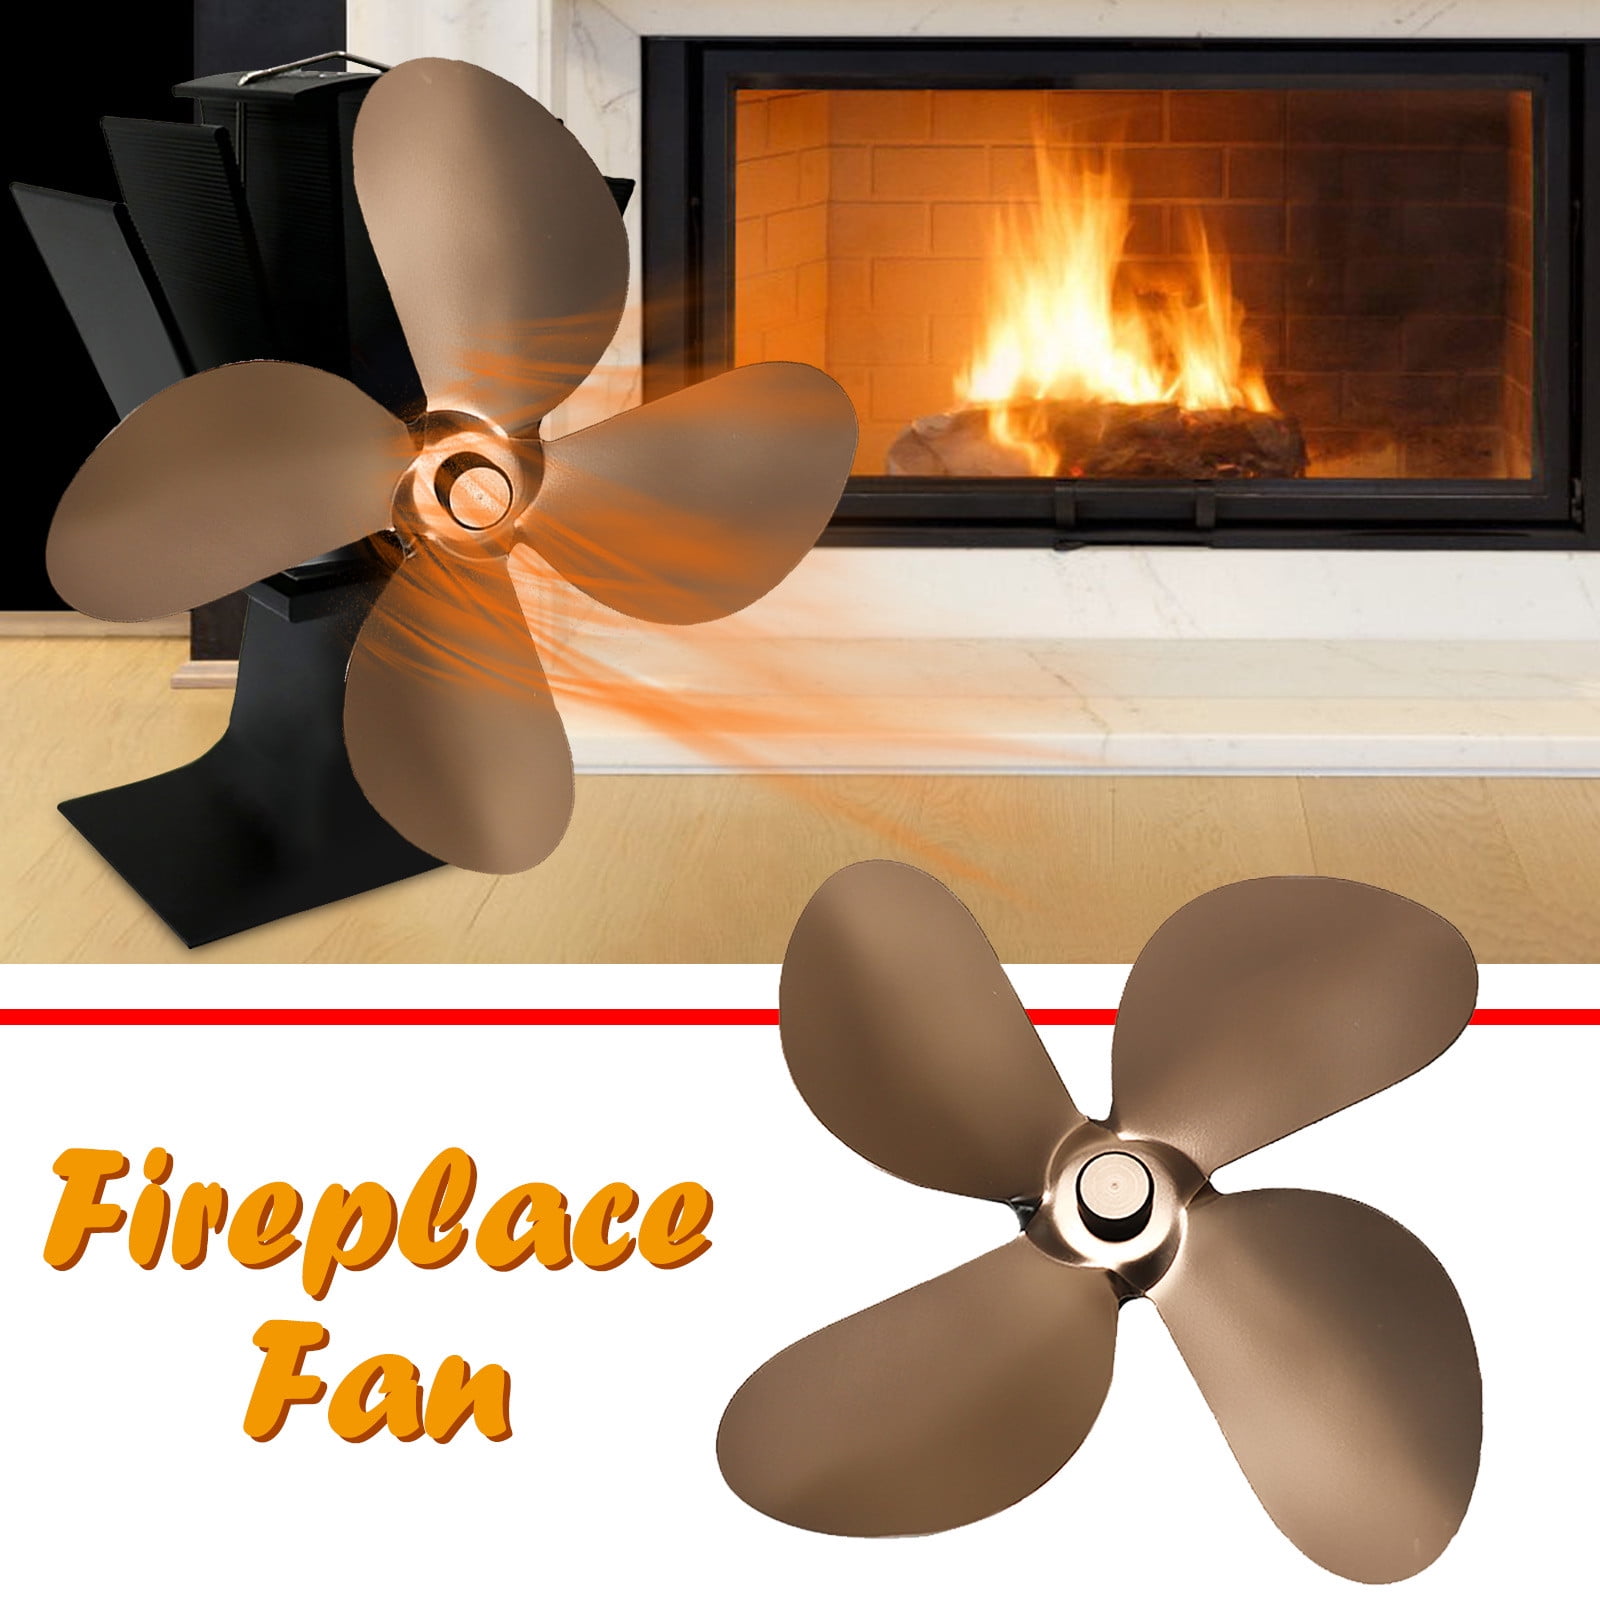 4 Blade For Wood Stove Fan Fireplace Fire Heat Power Saving Eco fan Replacement 